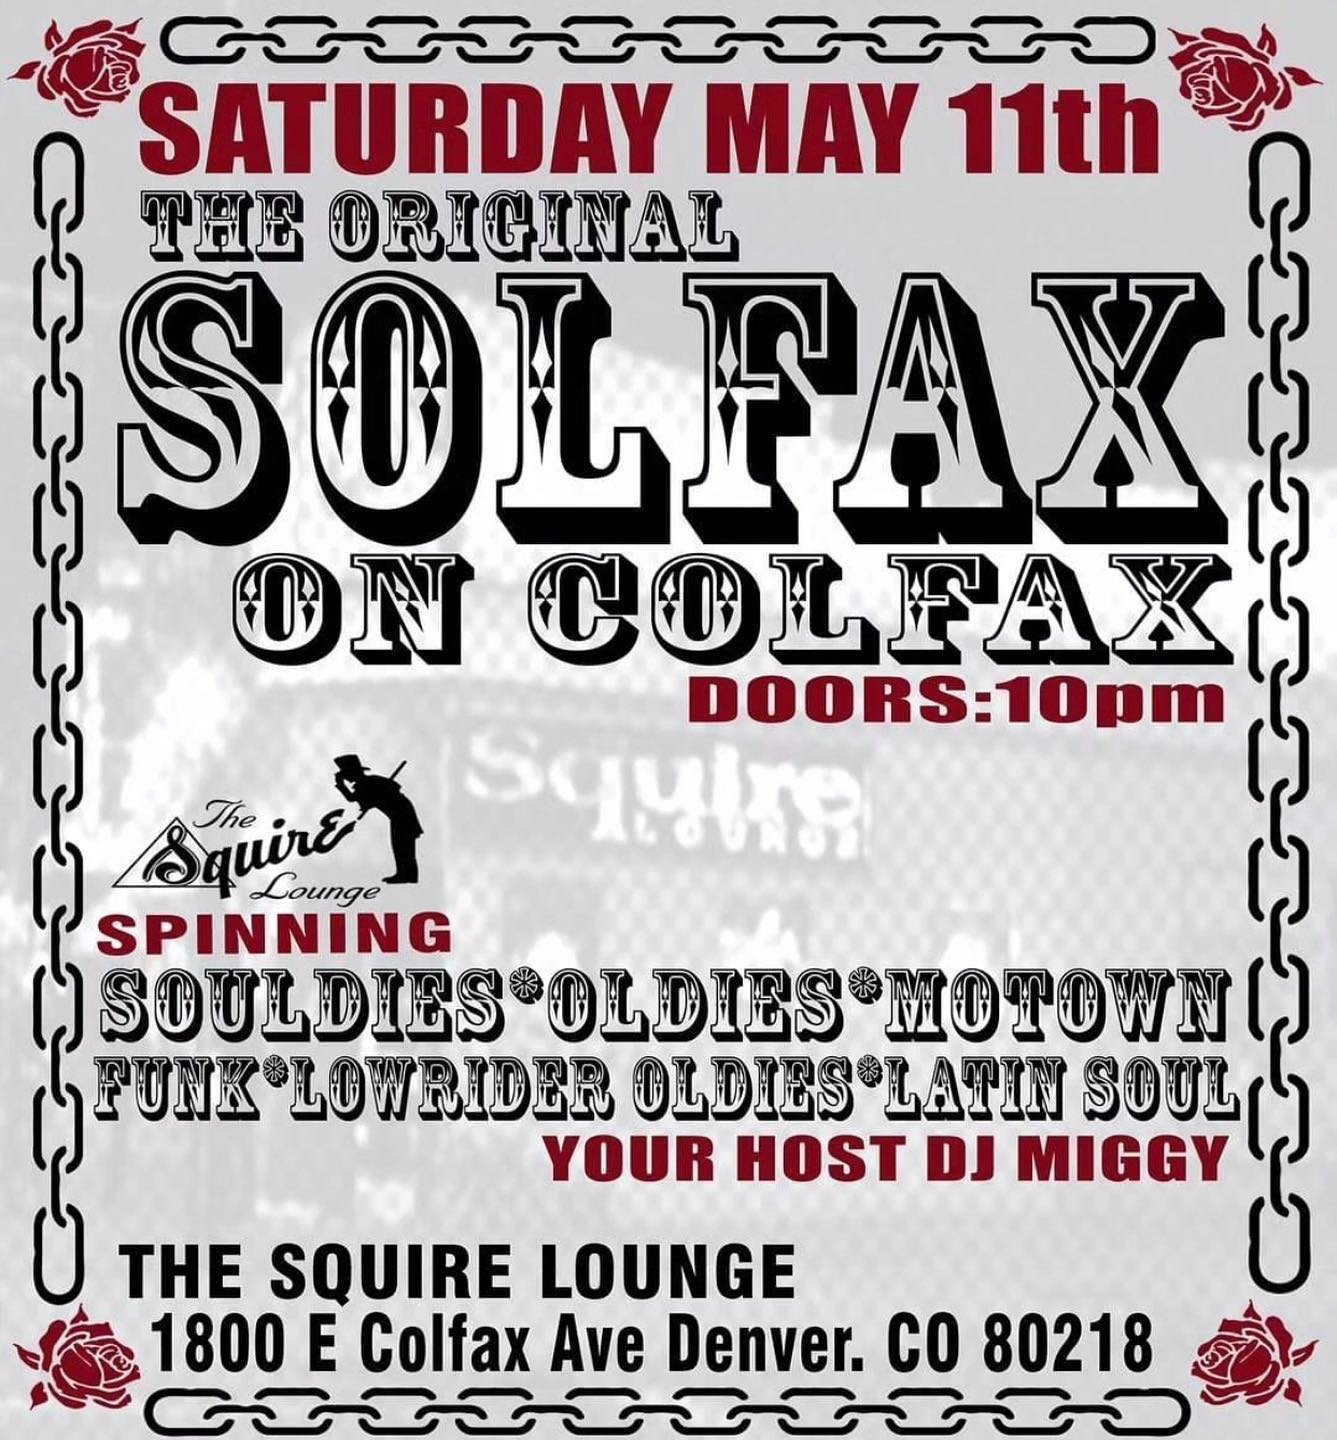 Miggy is back on Colfax this Saturday bringing all the soul we need! @miggy7575 #soulfax #soulfaxoncolfax